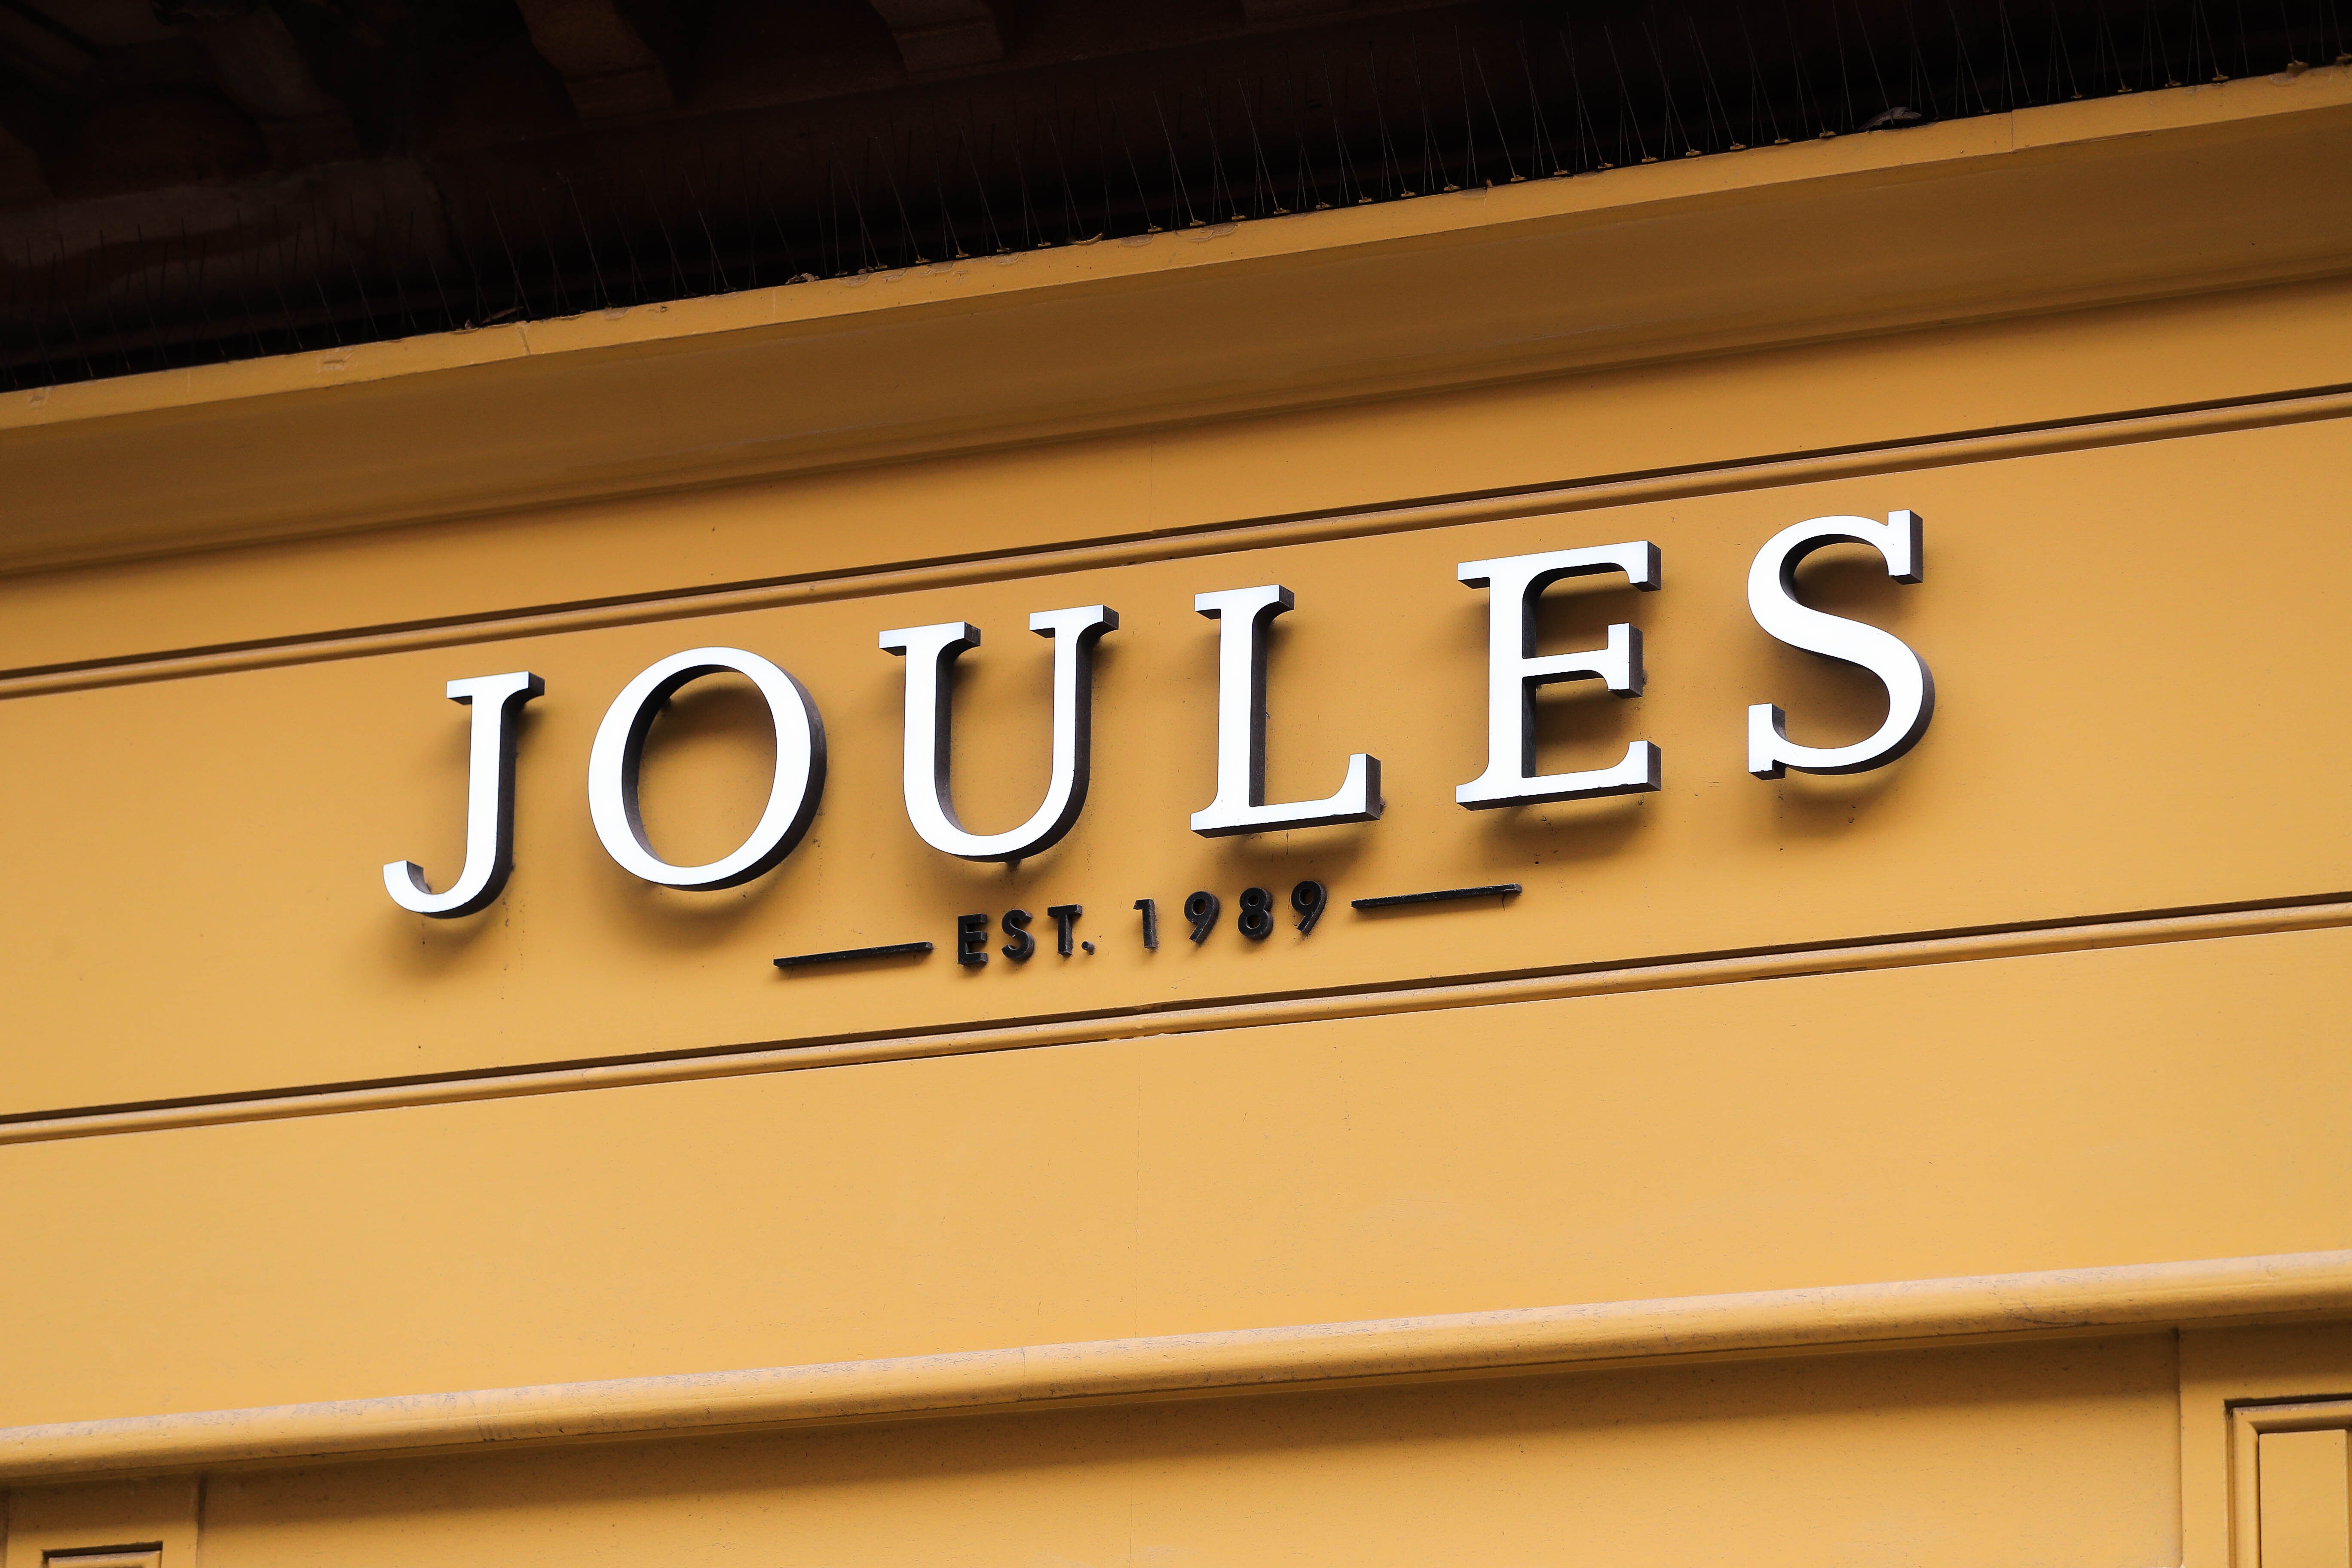 Fashion retailer Joules said profits are set to beat expectations after cost-cutting (Mike Egerton/PA)